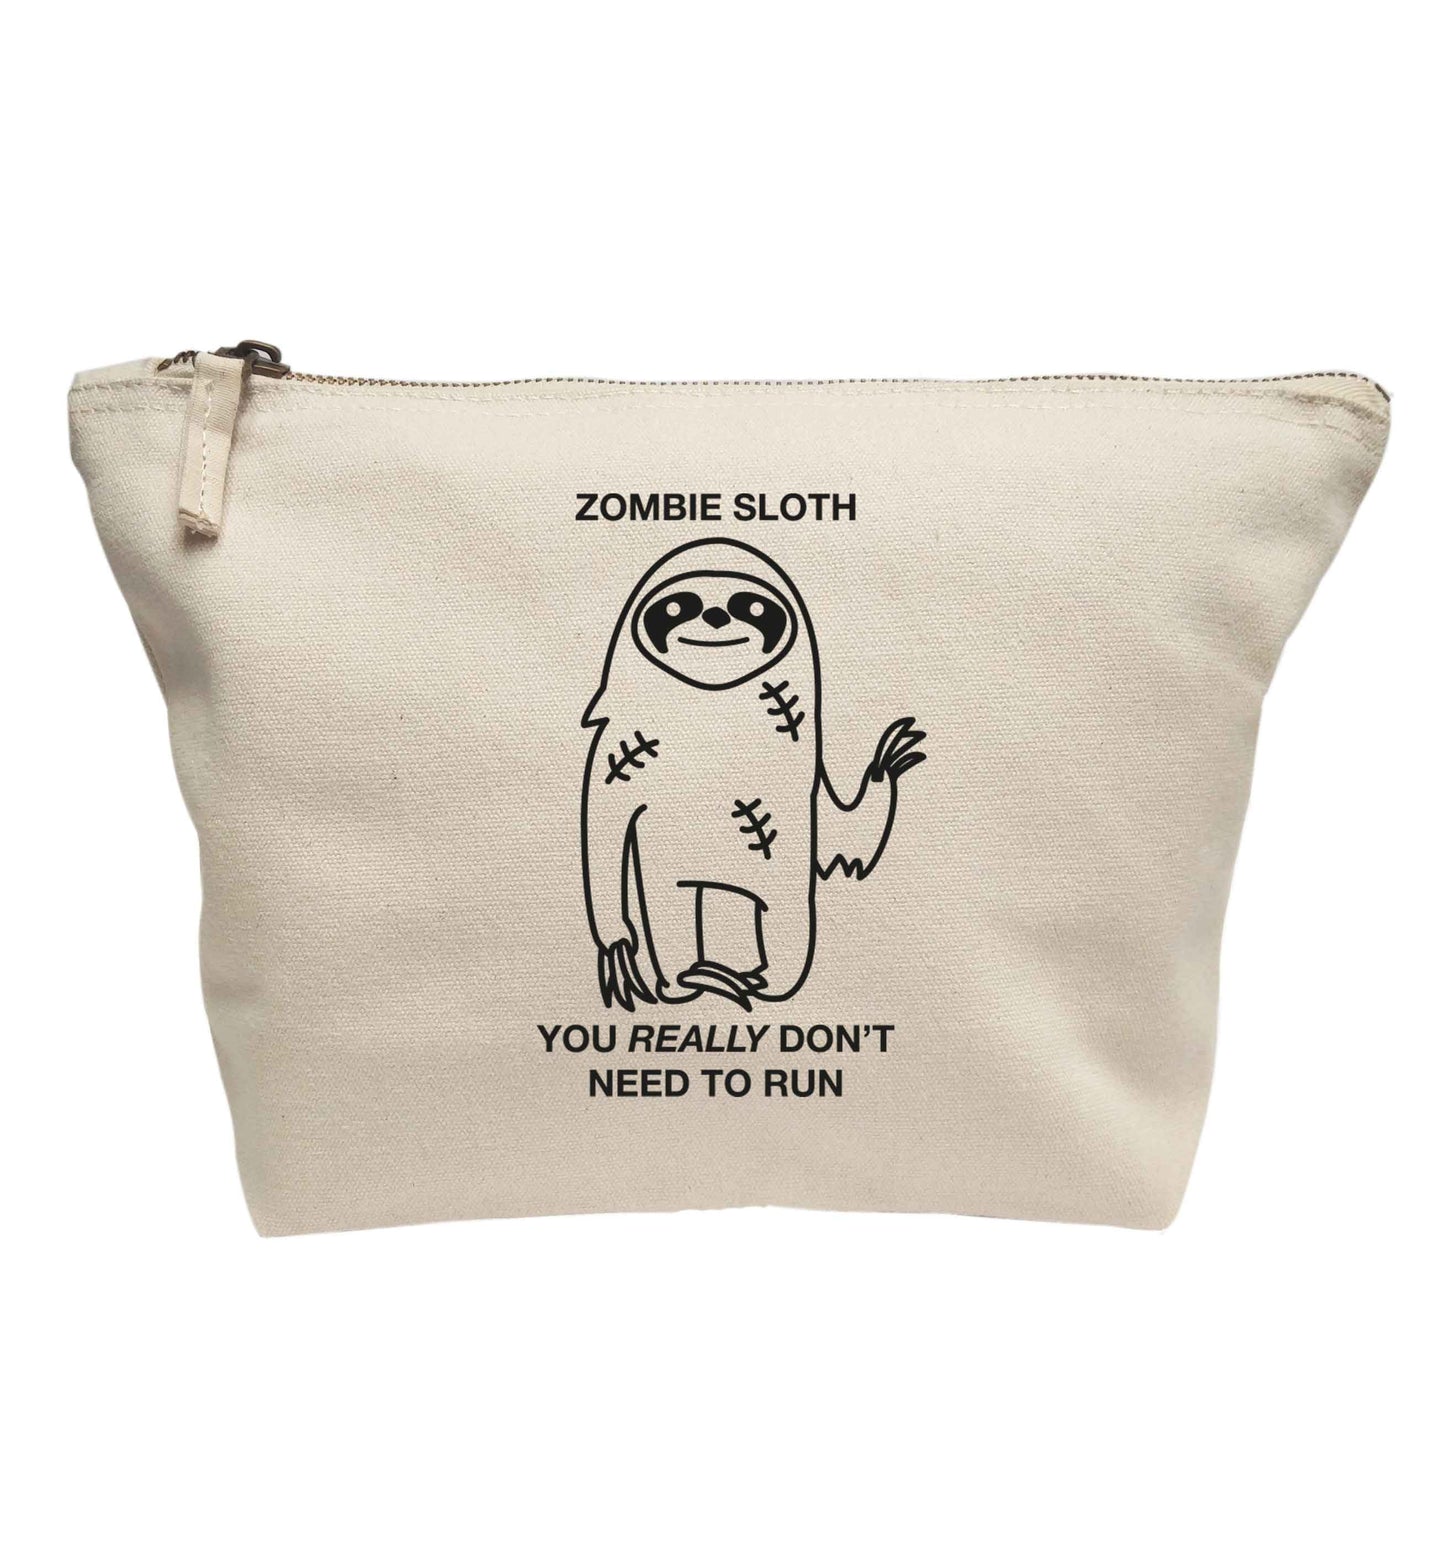 Zombie sloth you really don't need to run | Makeup / wash bag